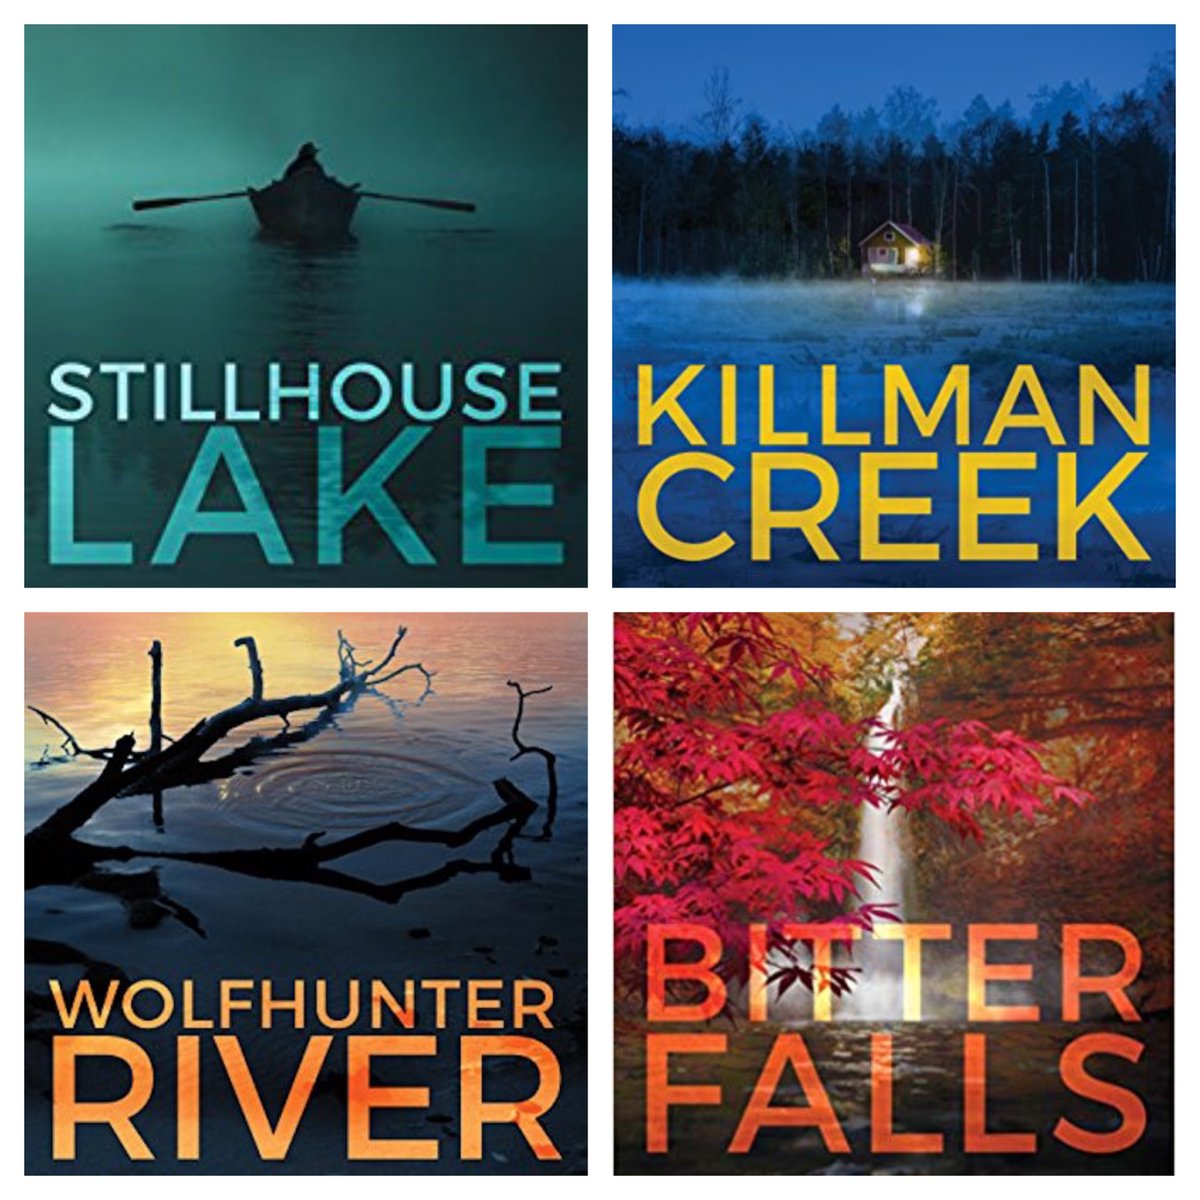 Stillhouse Lake 1-4 (Stillhouse Lake, Killman Creek, Wolfhunter River, and Bitter Falls) are currently $1.99 with book 5, Heartbreak Bay, up for preorder for just $3.99